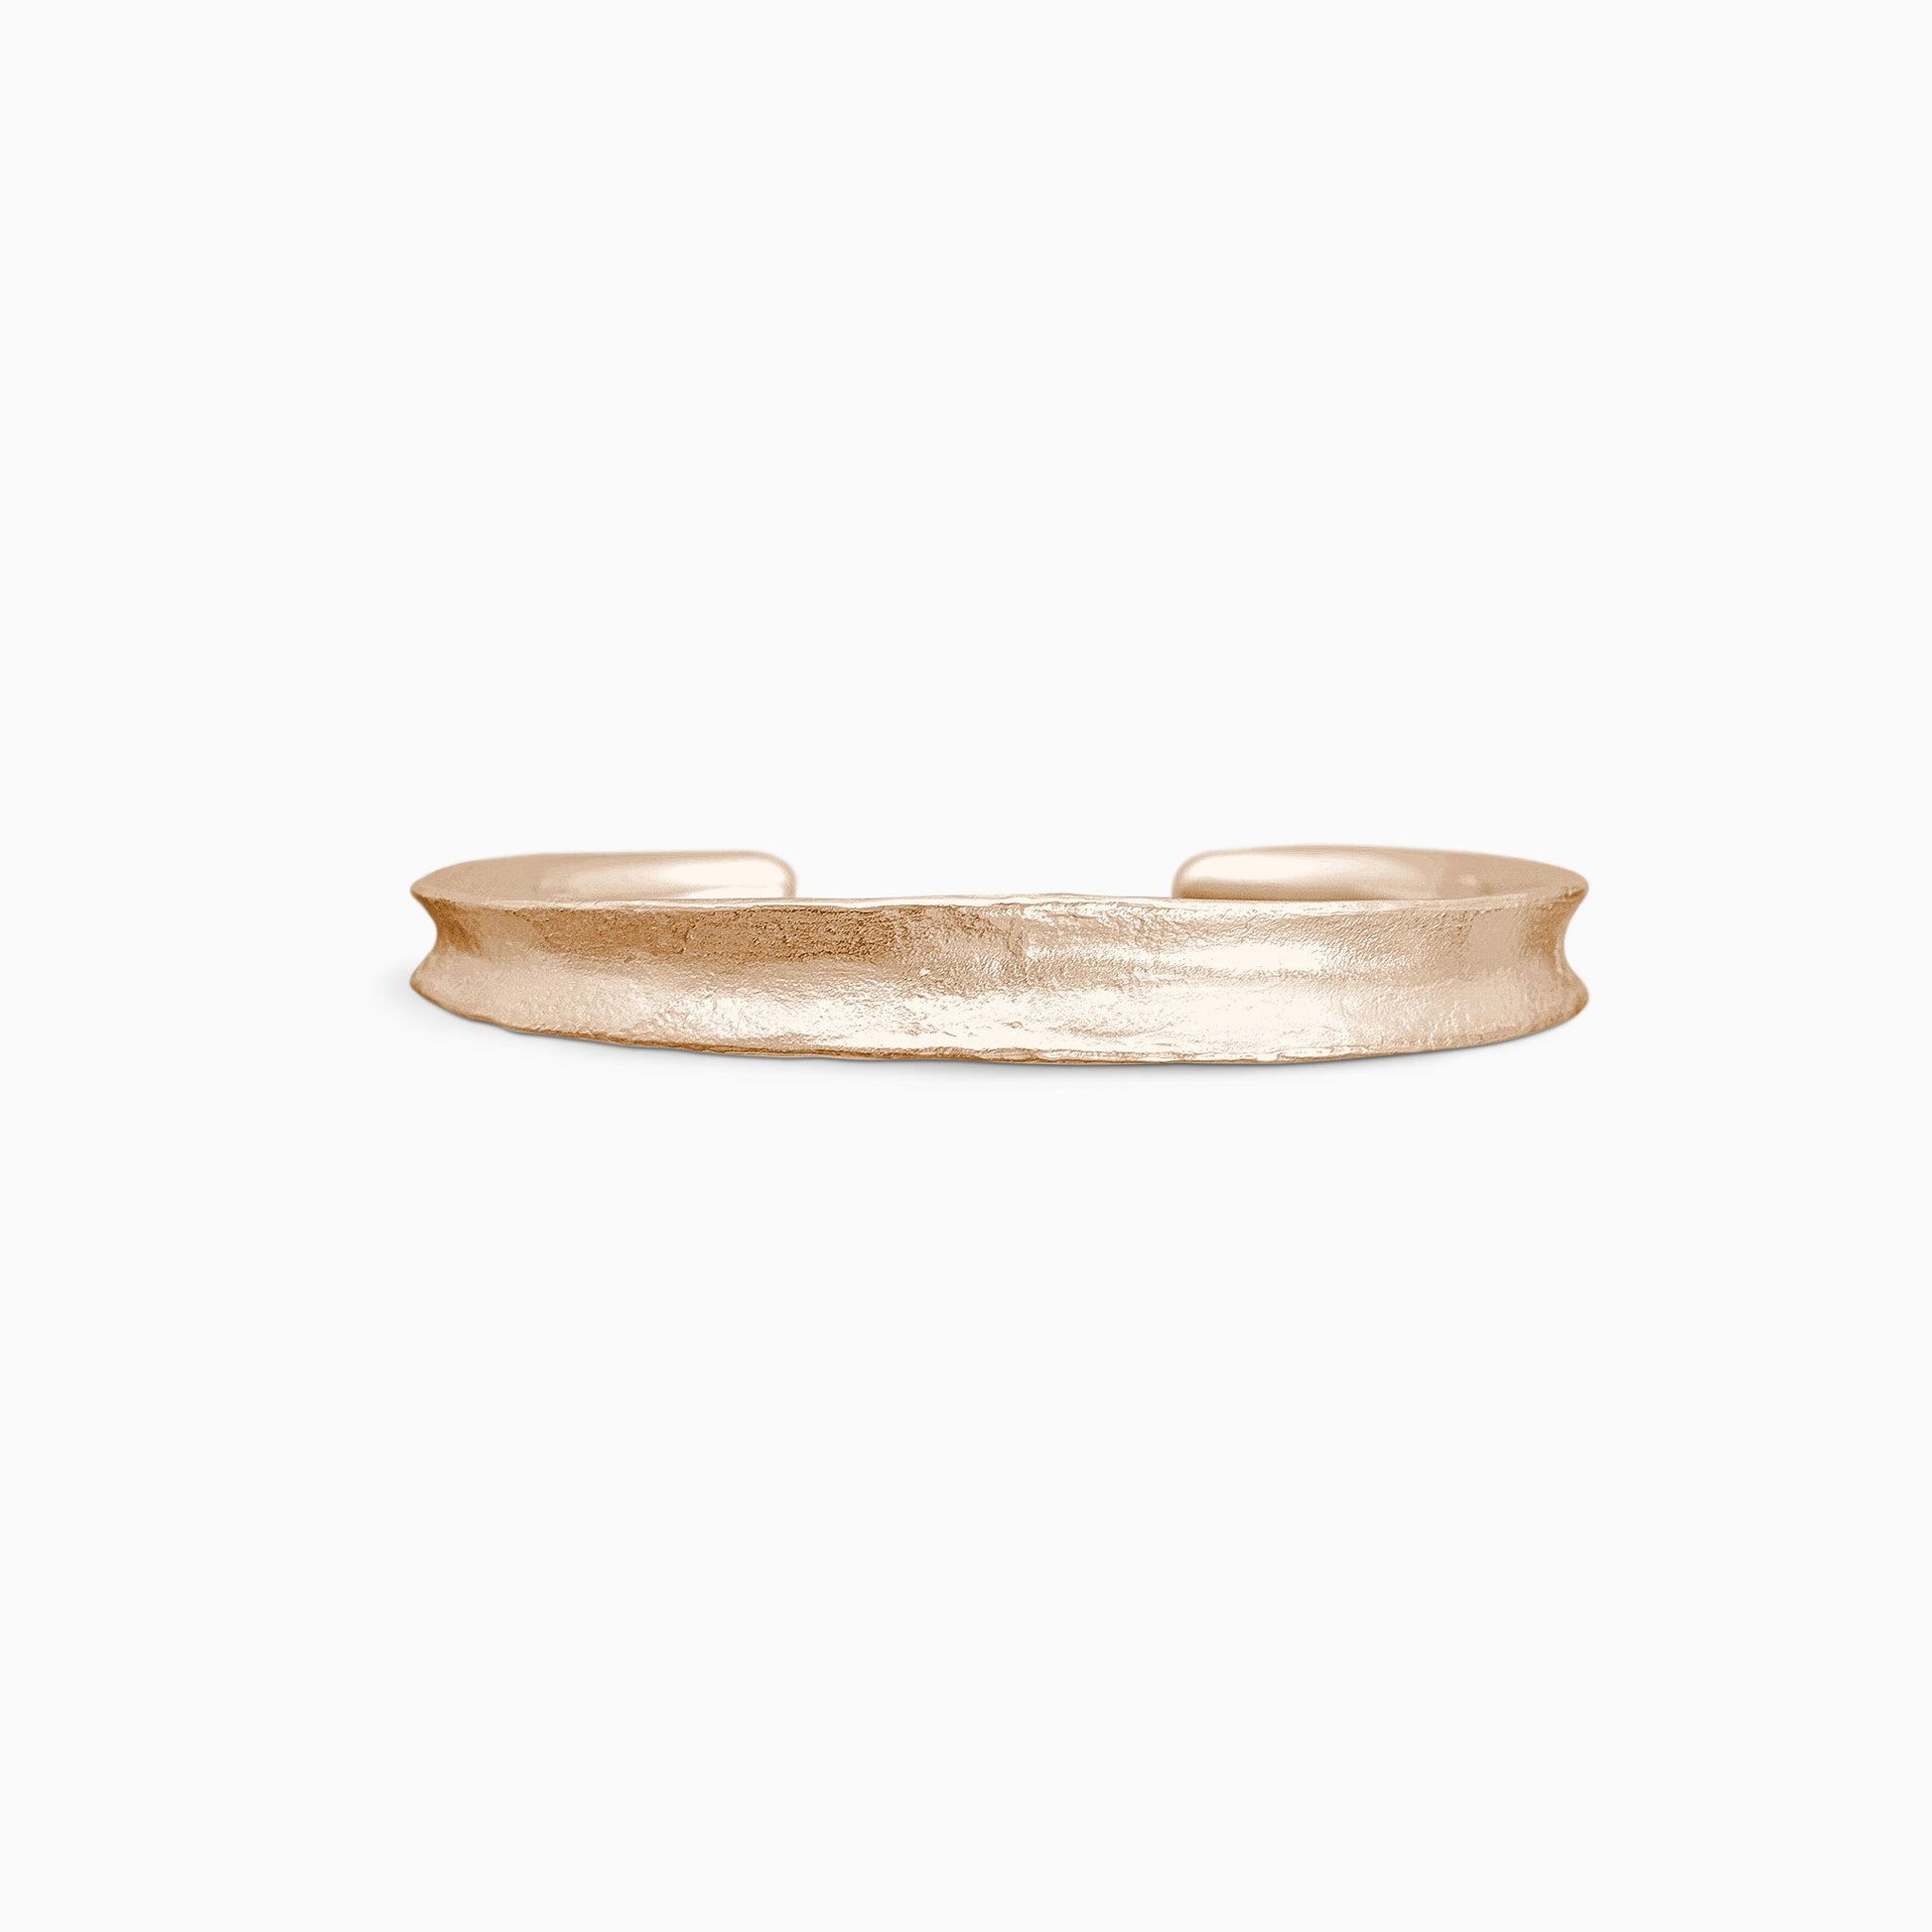 An 18ct Fairtrade rose gold Cuff bangle fitting close to wrist. Concave and textured. Open ended to get on and off. Width 8mm. Inside oval diameter 58mm. 